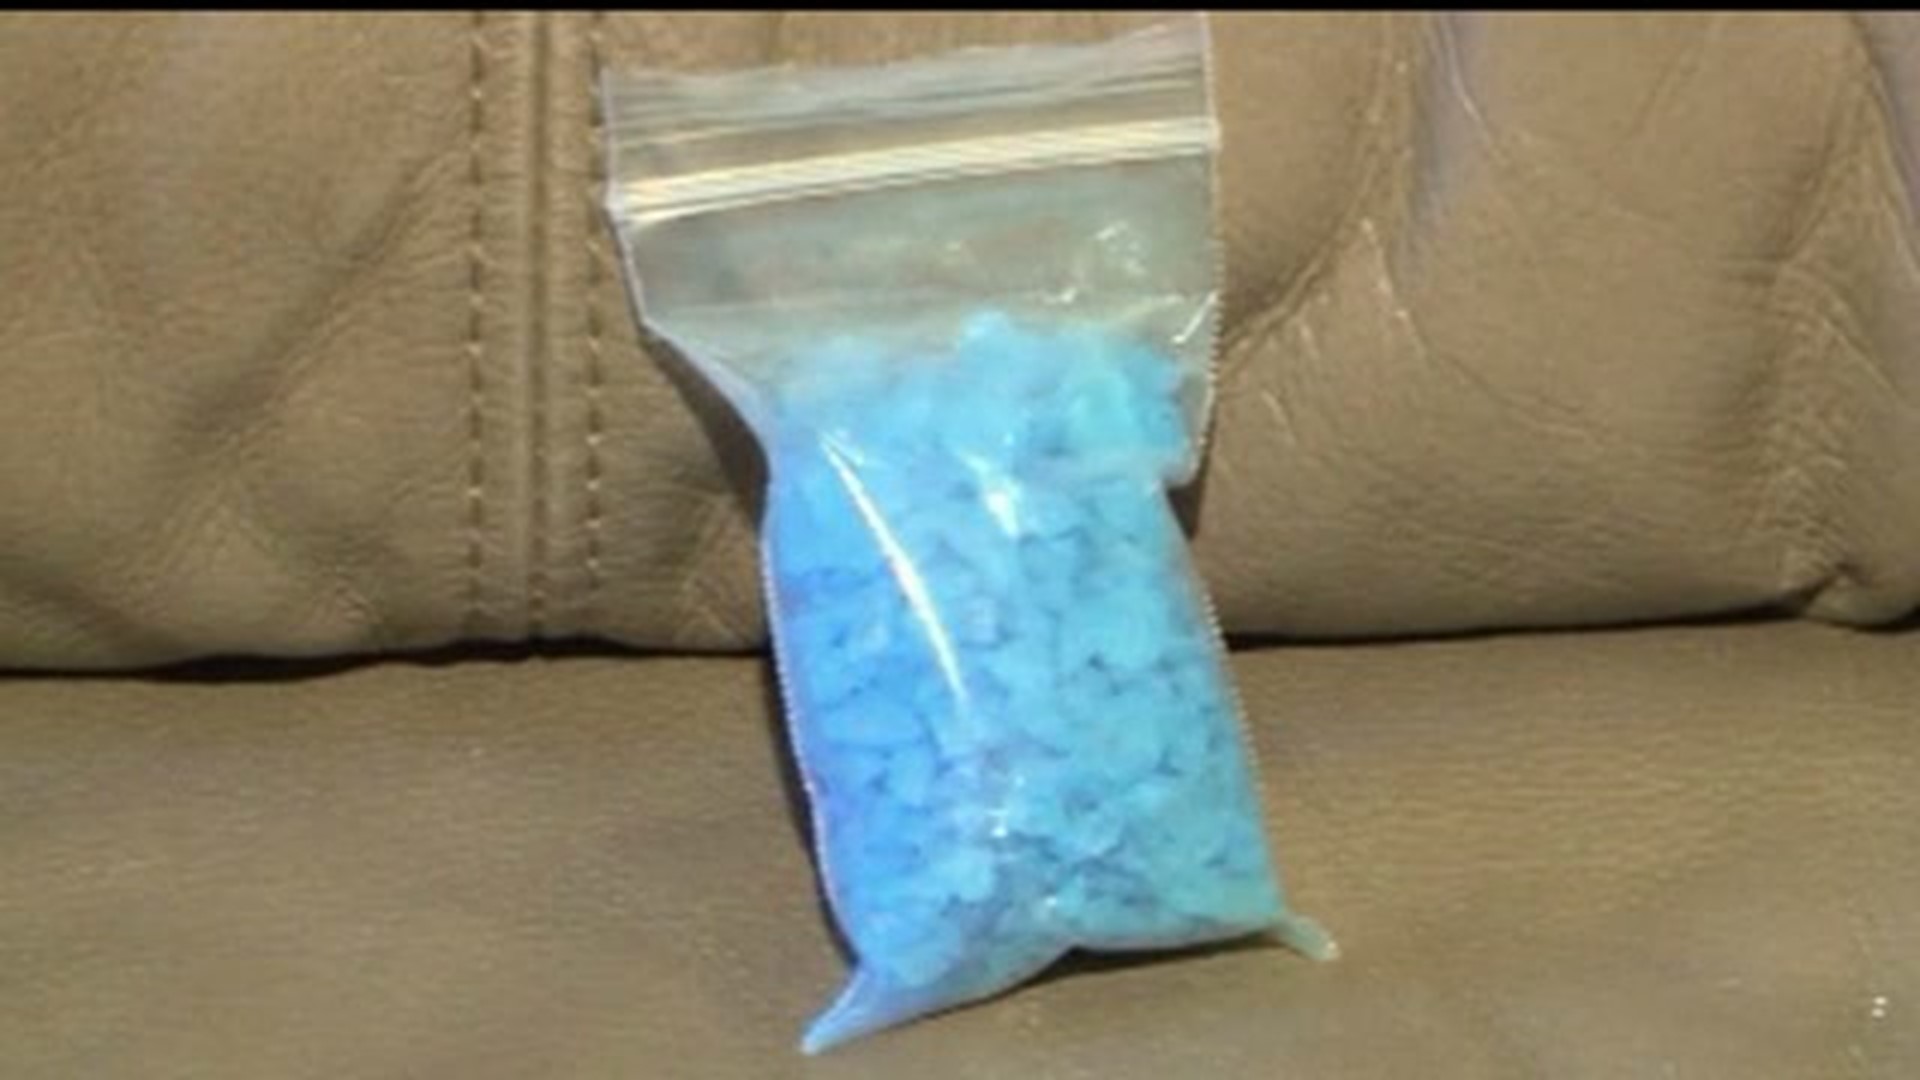 Local reaction: Elementary School students suspended for bringing "Breaking Bad" candy to school